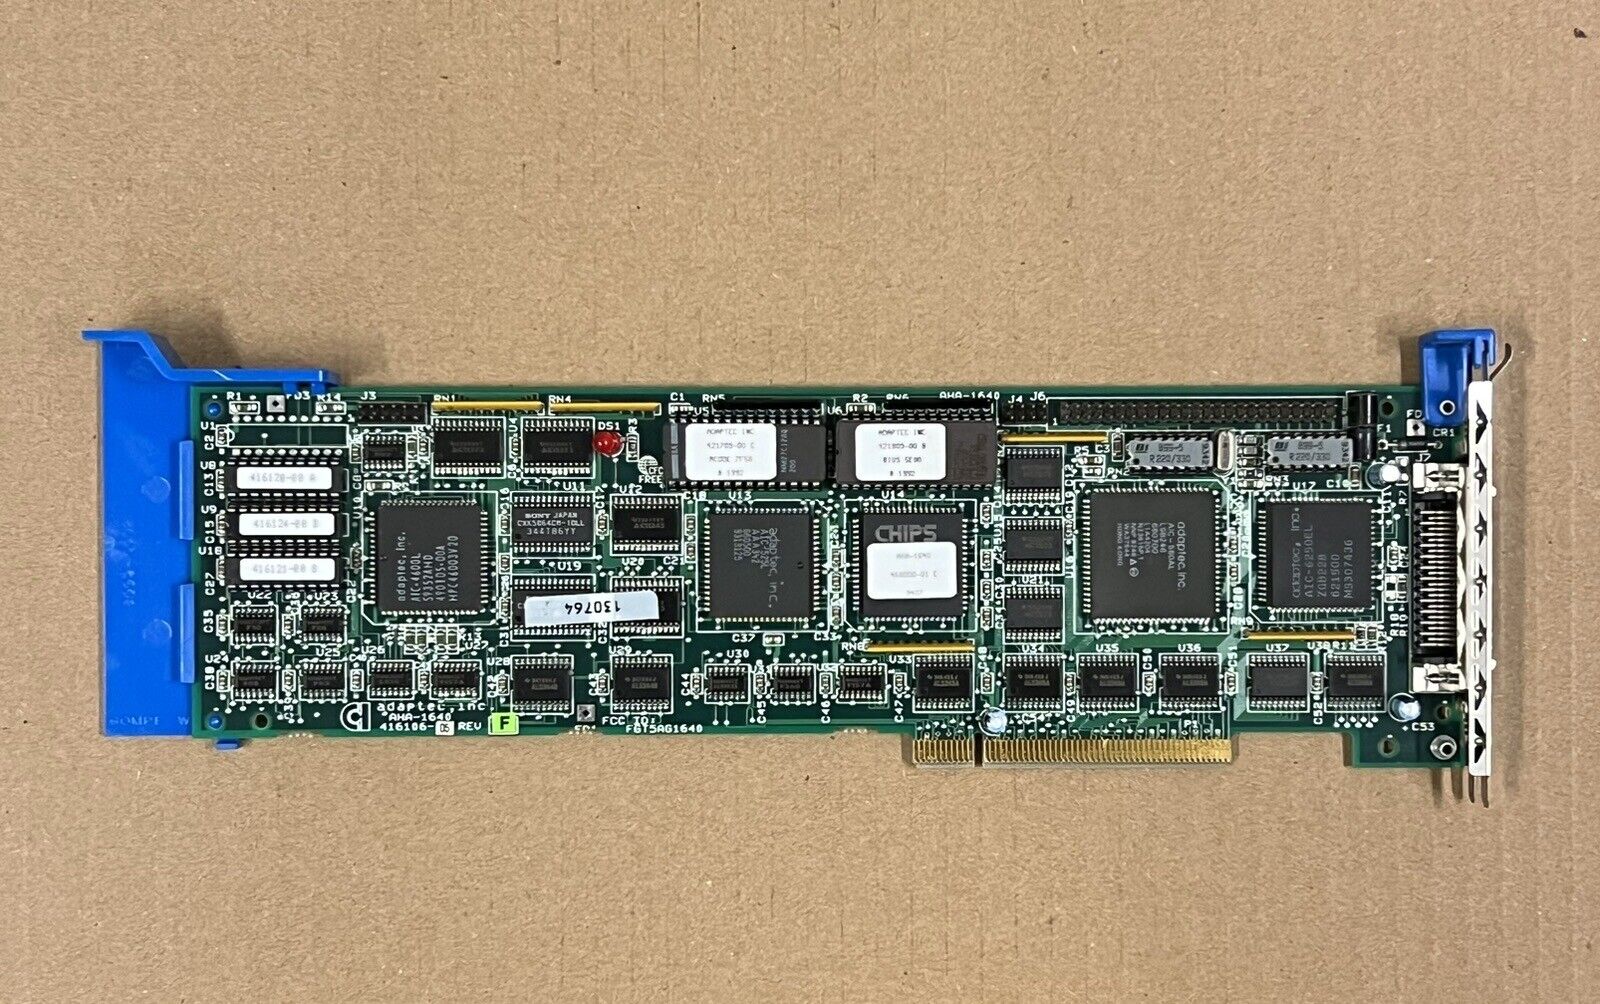 AHA-1640 | ADAPTEC MICROCHANNEL SCSI ADAPTER FOR IBM PS/2